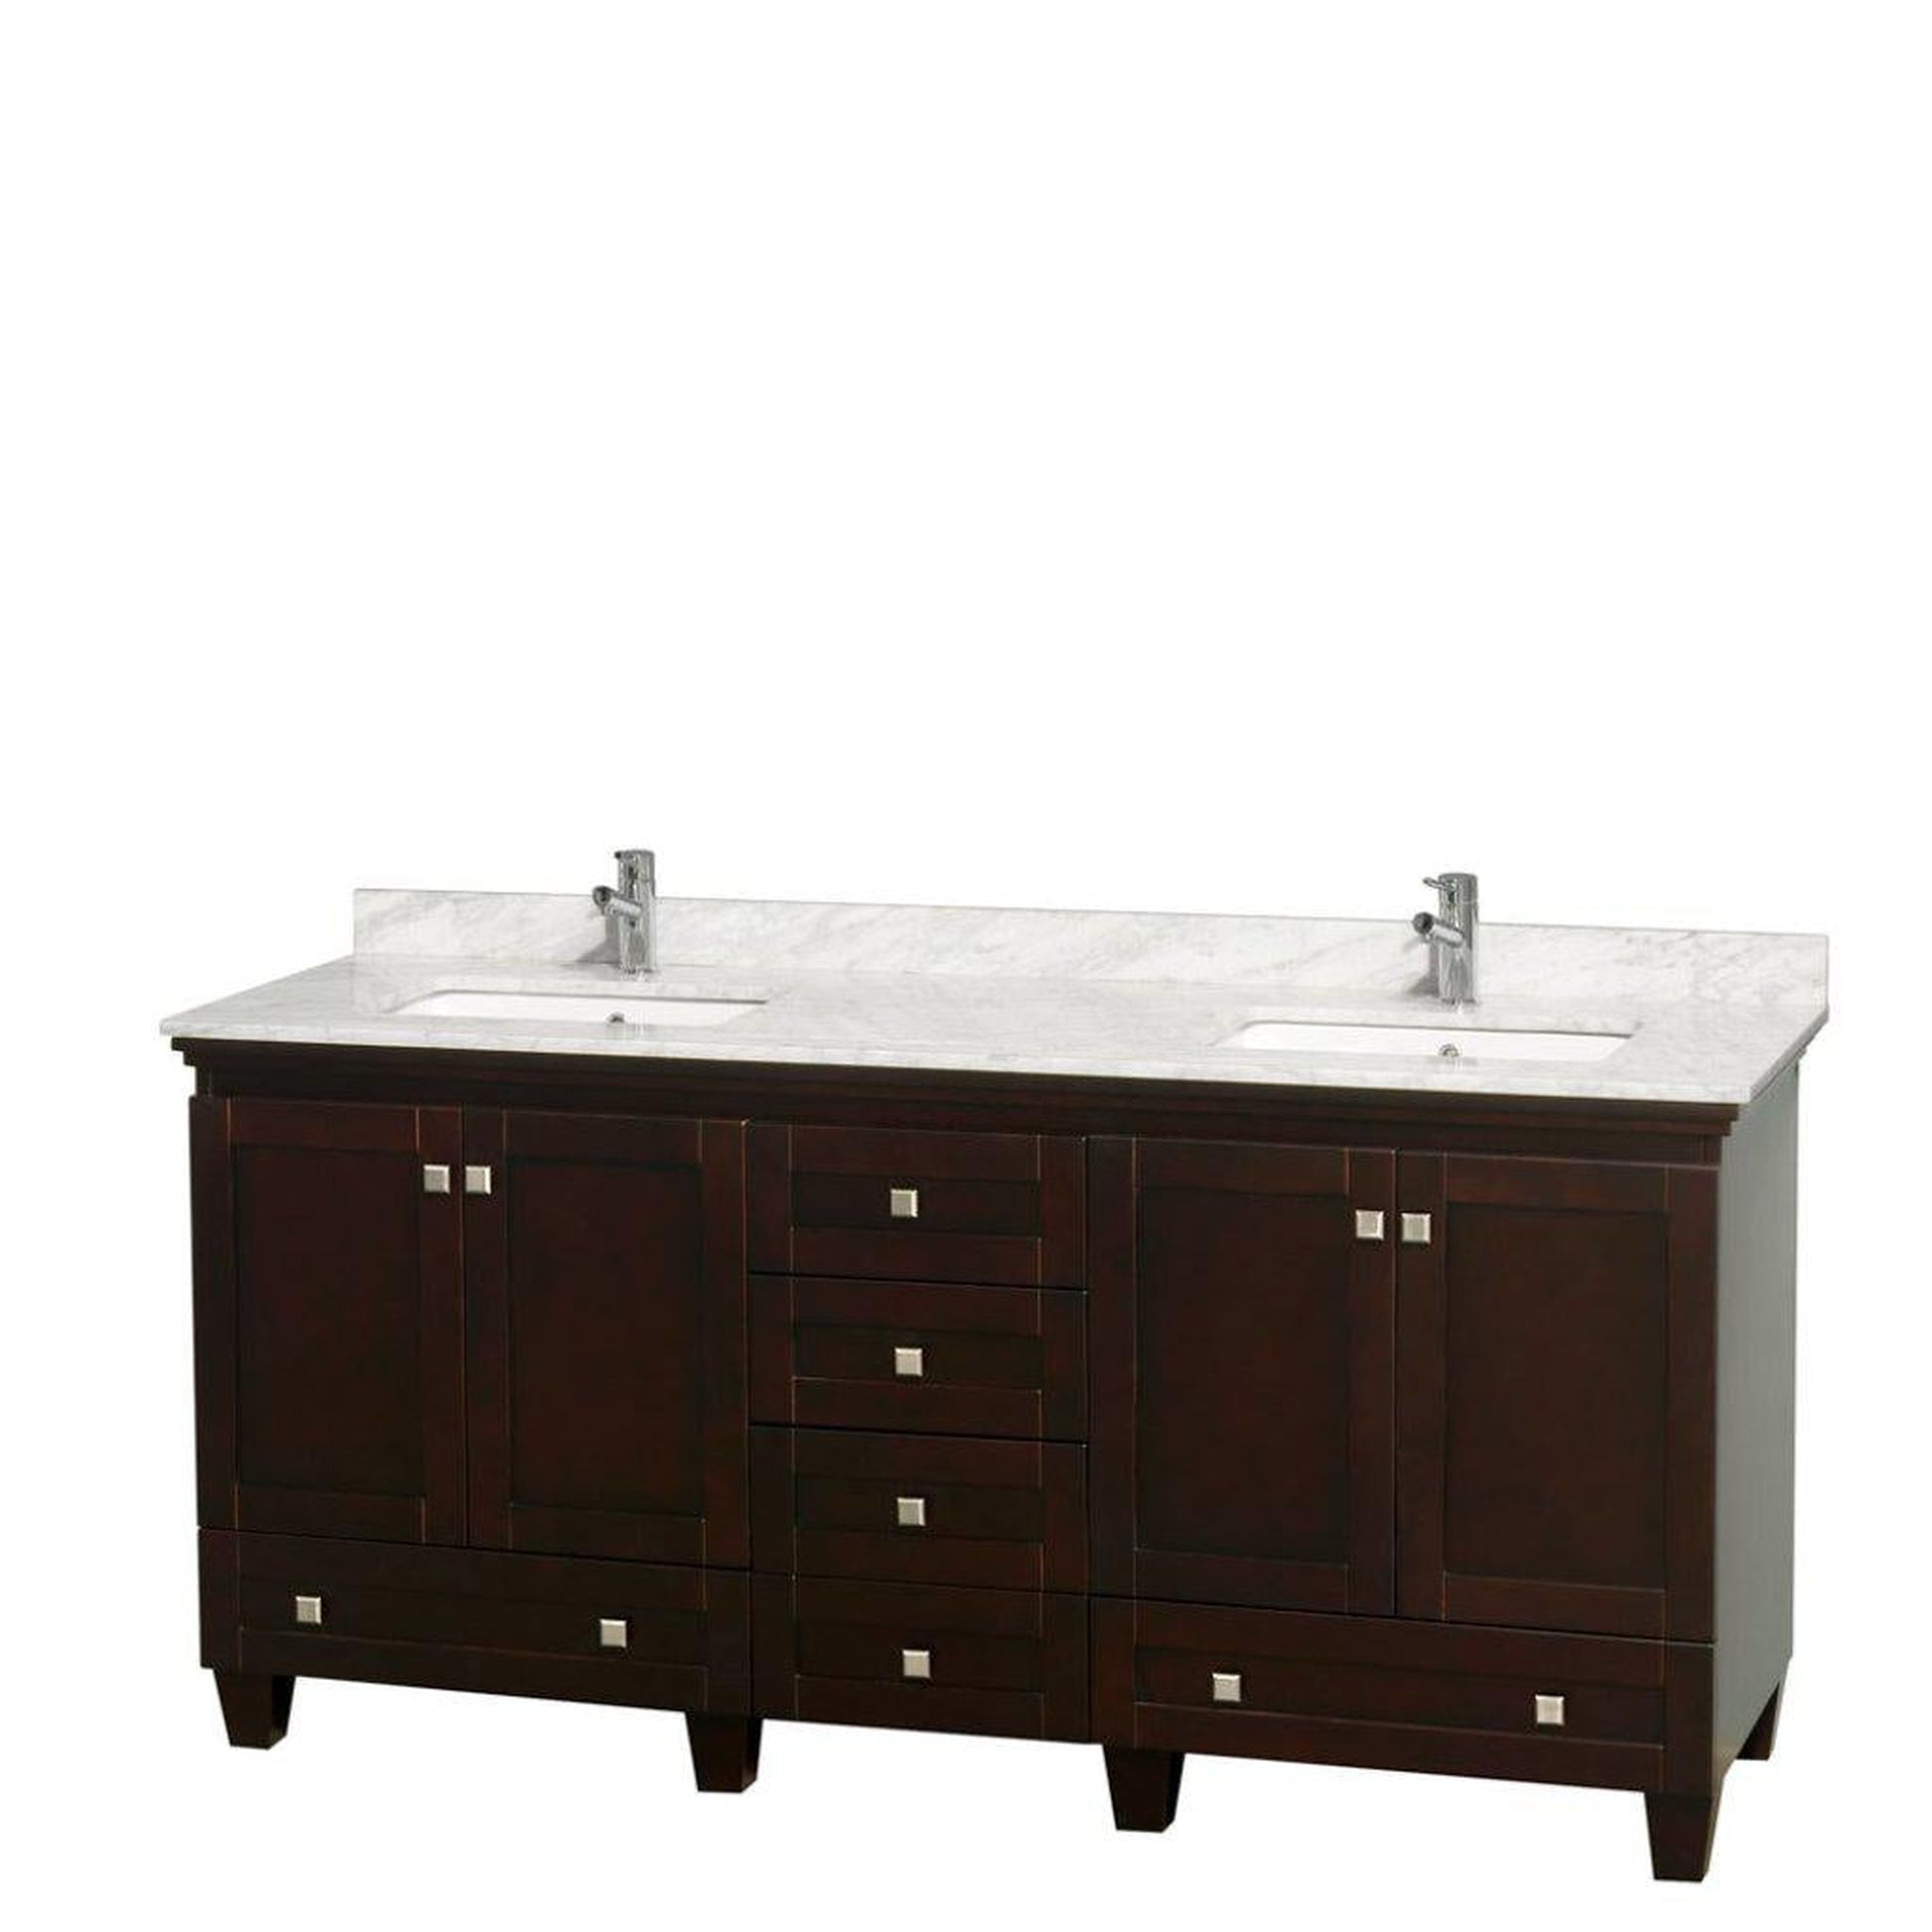 Wyndham Collection Acclaim 72" Double Bathroom Espresso Vanity With White Carrara Marble Countertop And Undermount Square Sinks